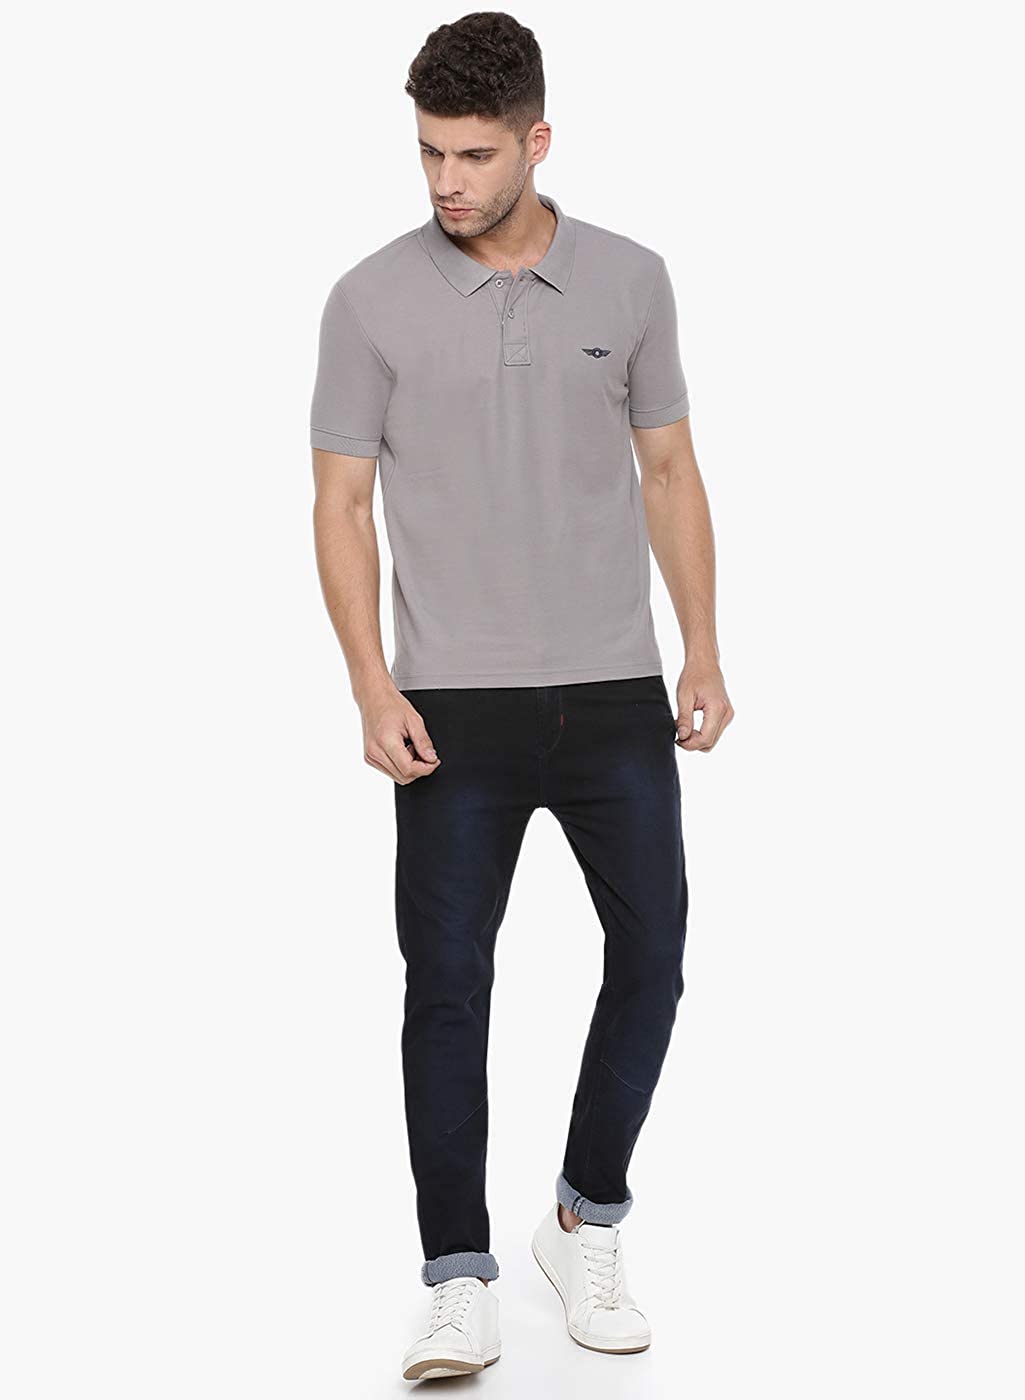 Grey Slim Fit Polo Neck T-Shirt with collar for Men - Stilento